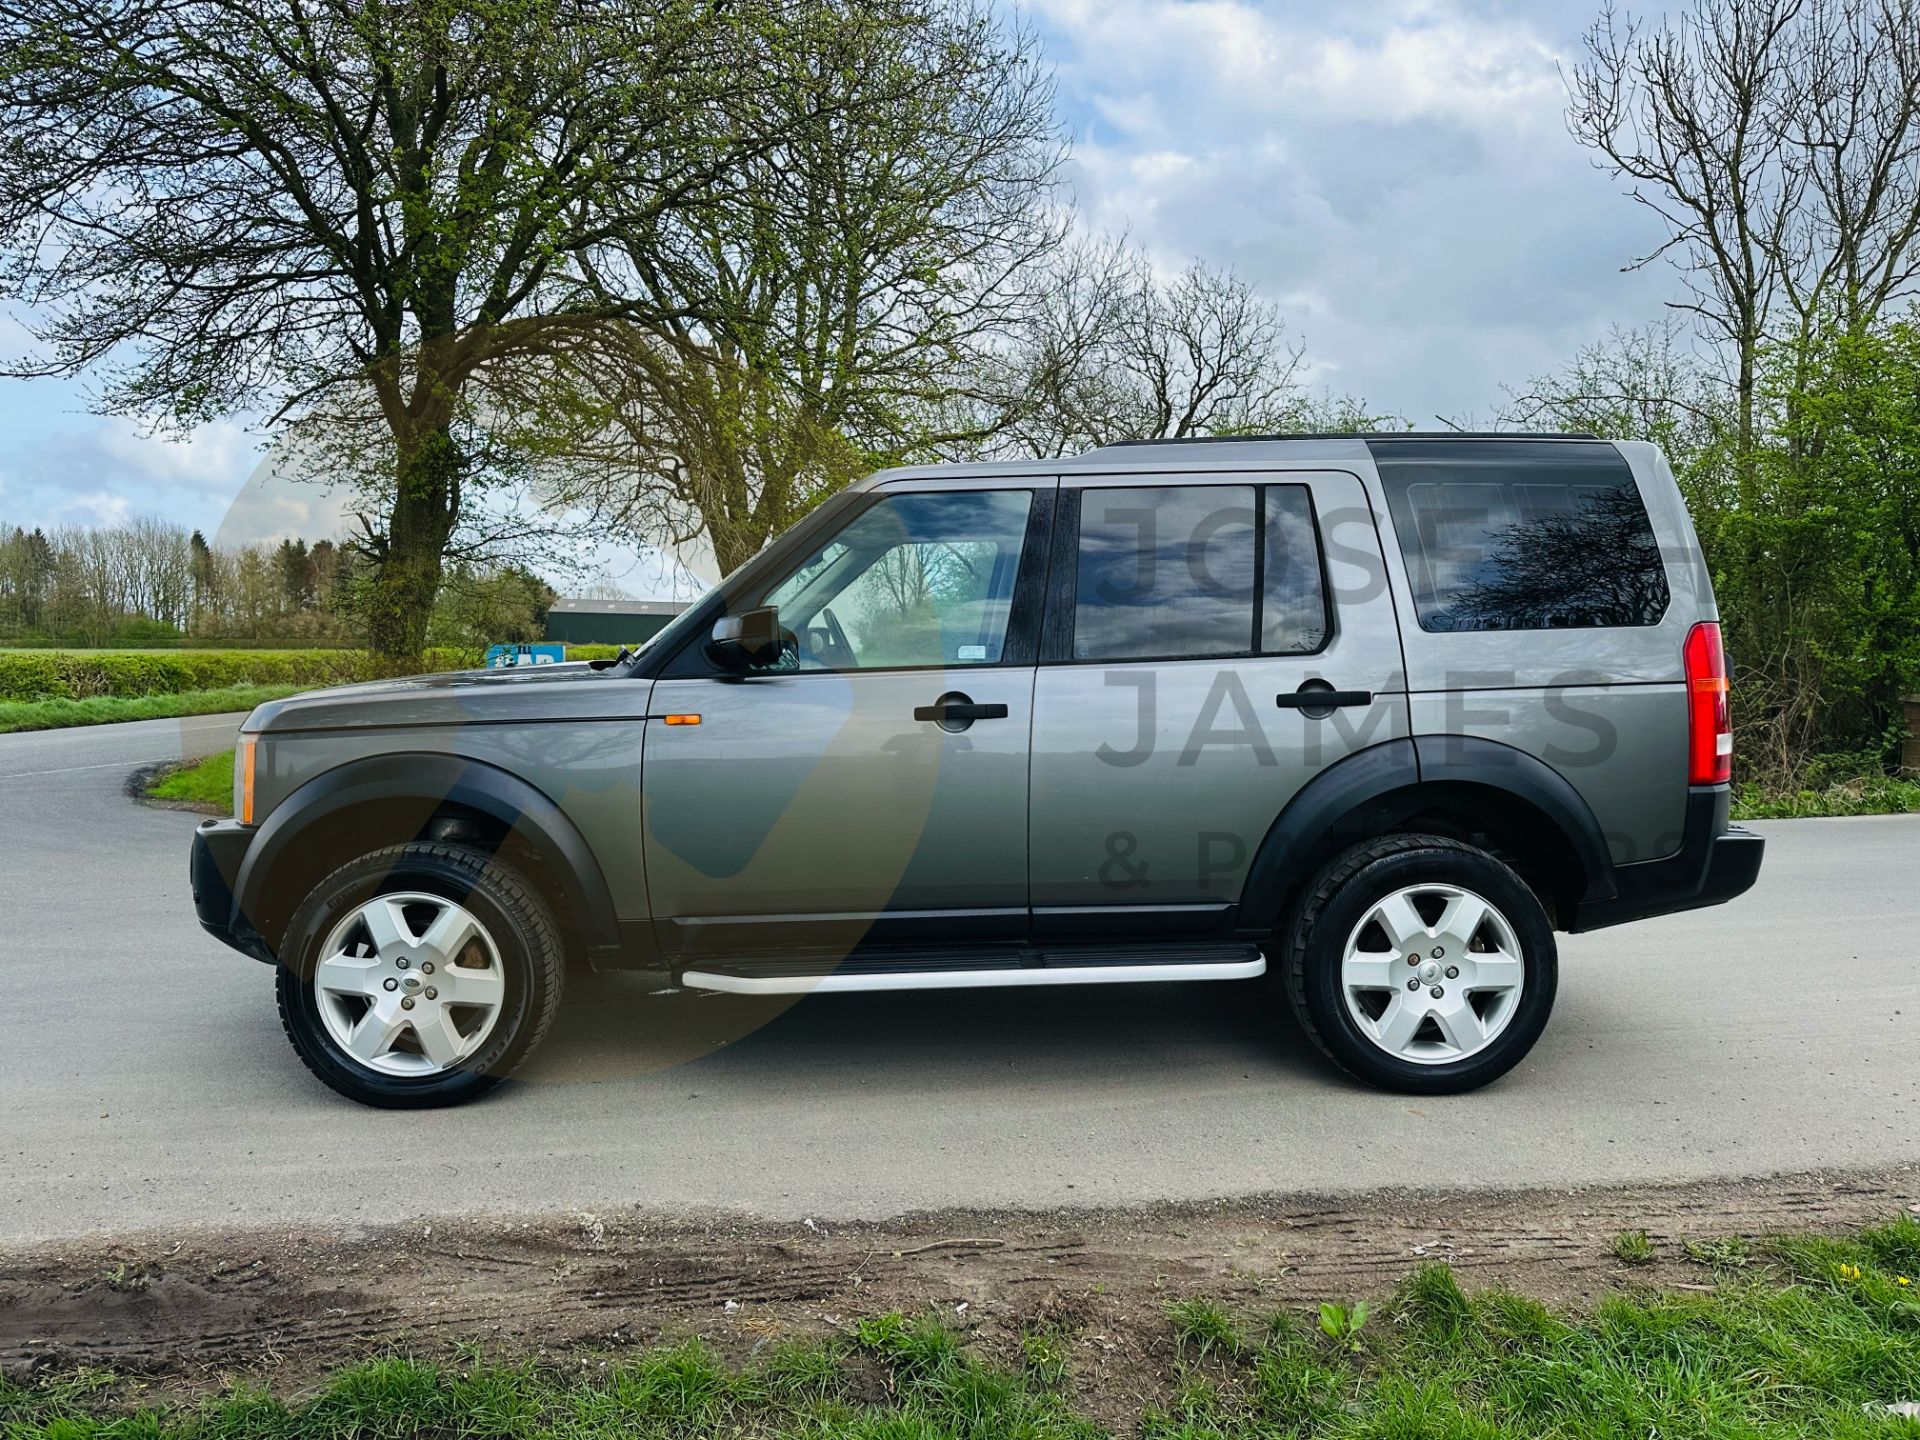 (ON SALE) LAND ROVER DISCOVERY TDV6 *HSE EDITION* AUTO (08 REG) 7 SEATER - 12X SERVICES (NO VAT) - Image 6 of 51